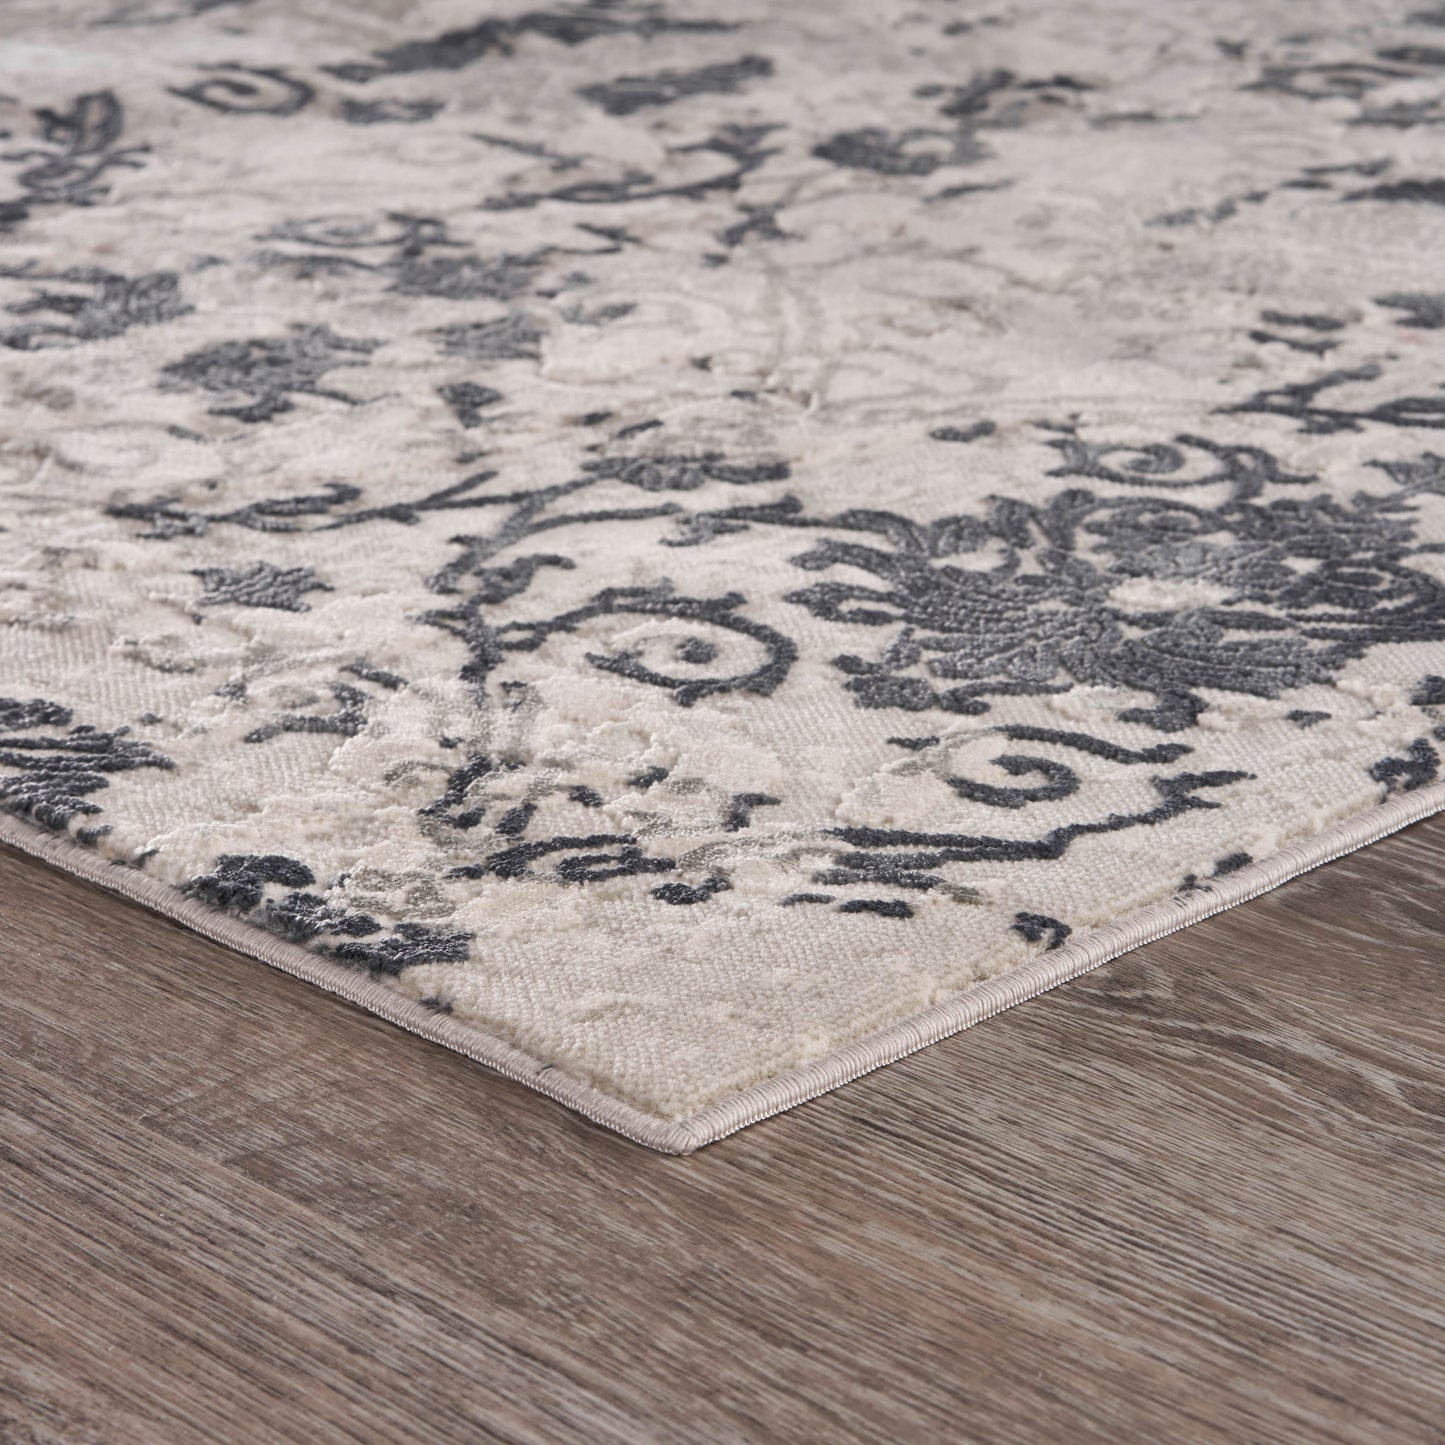 2' X 3' Cream And Gray Damask Stain Resistant Area Rug